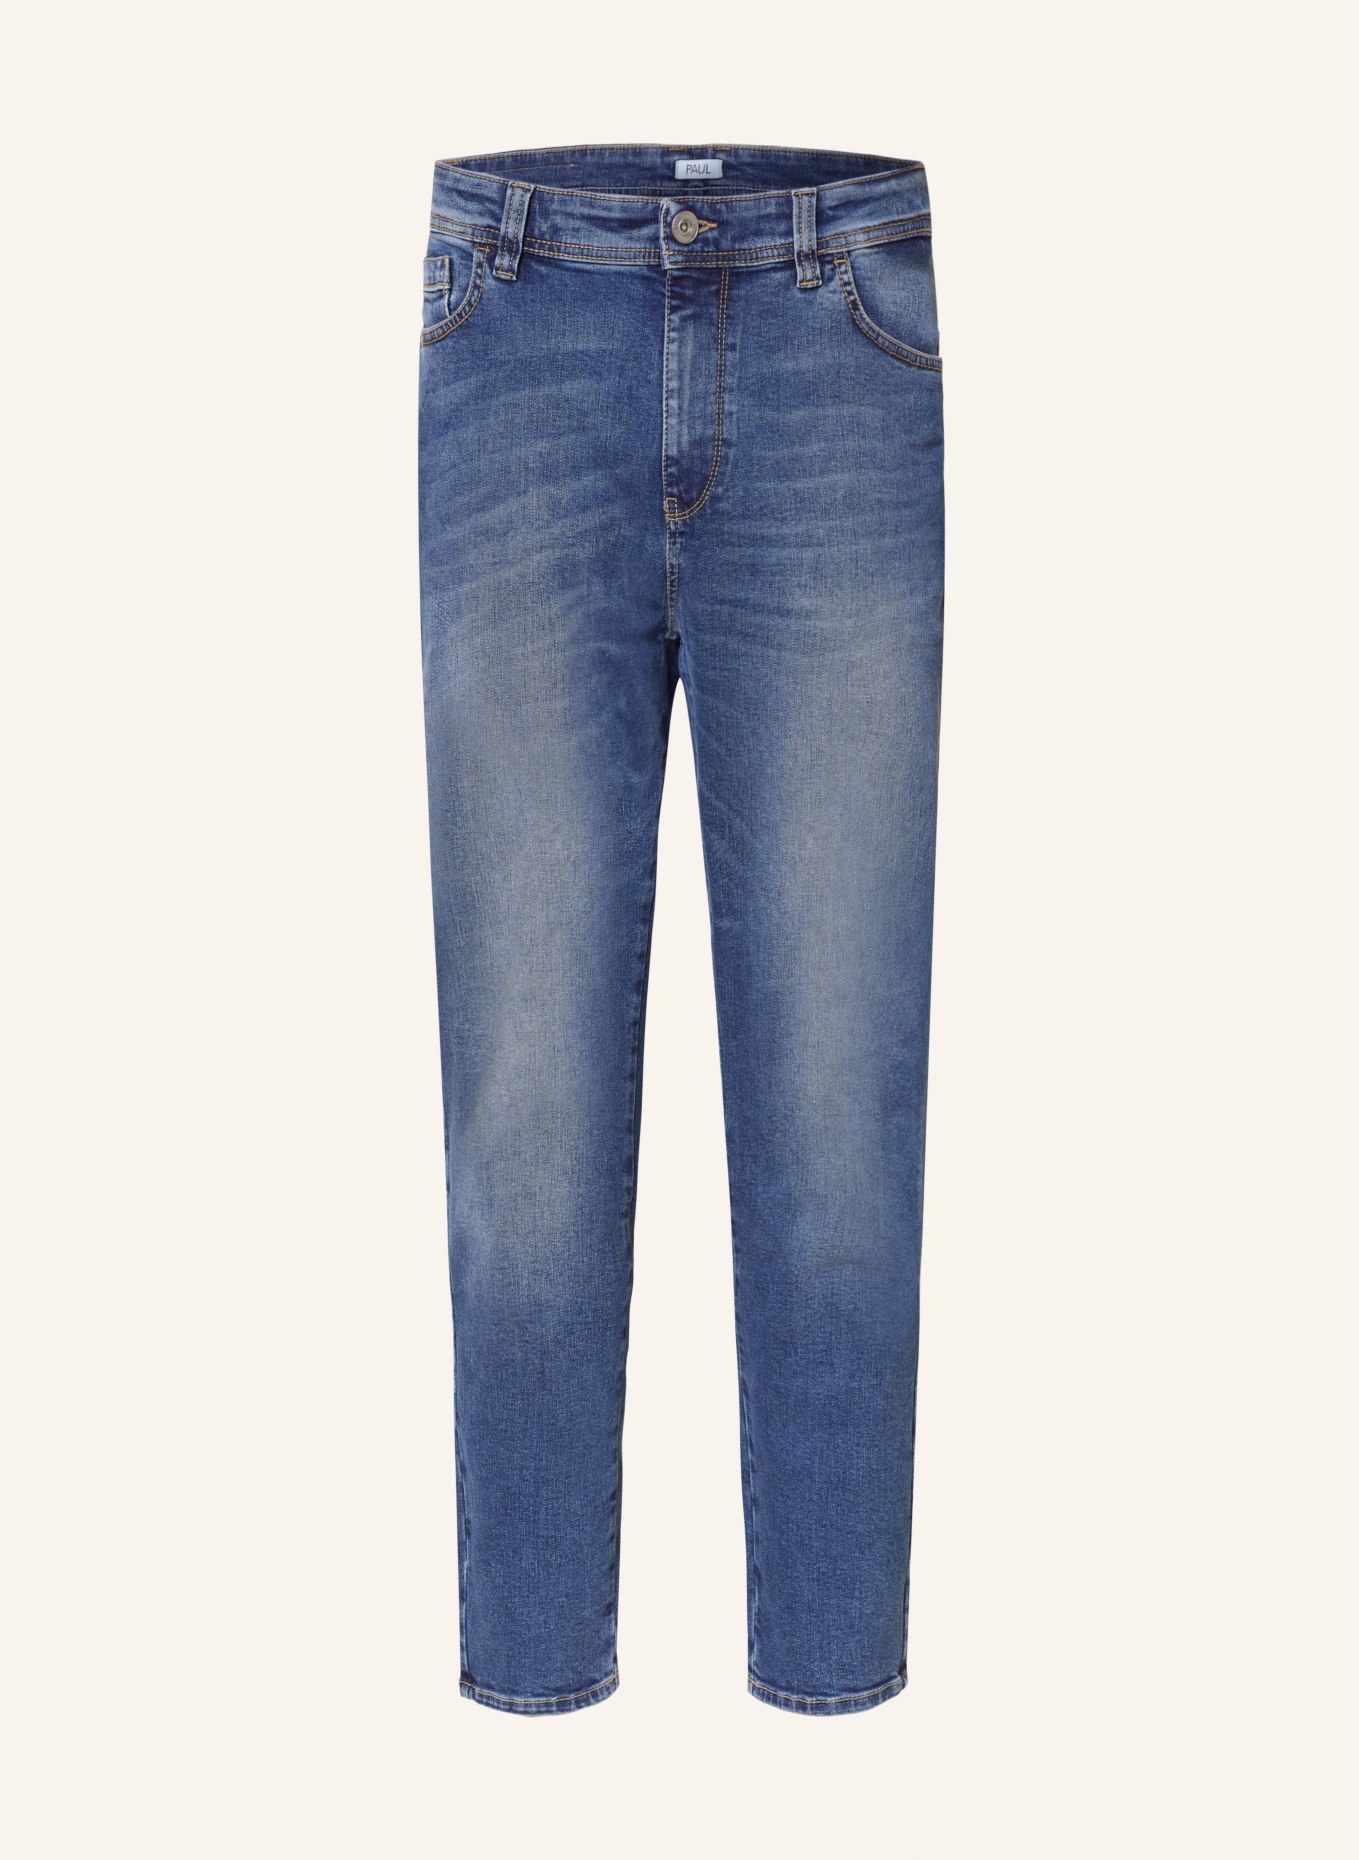 PAUL Jeans Tapered Fit, Farbe: 4348 mid blue (Bild 1)